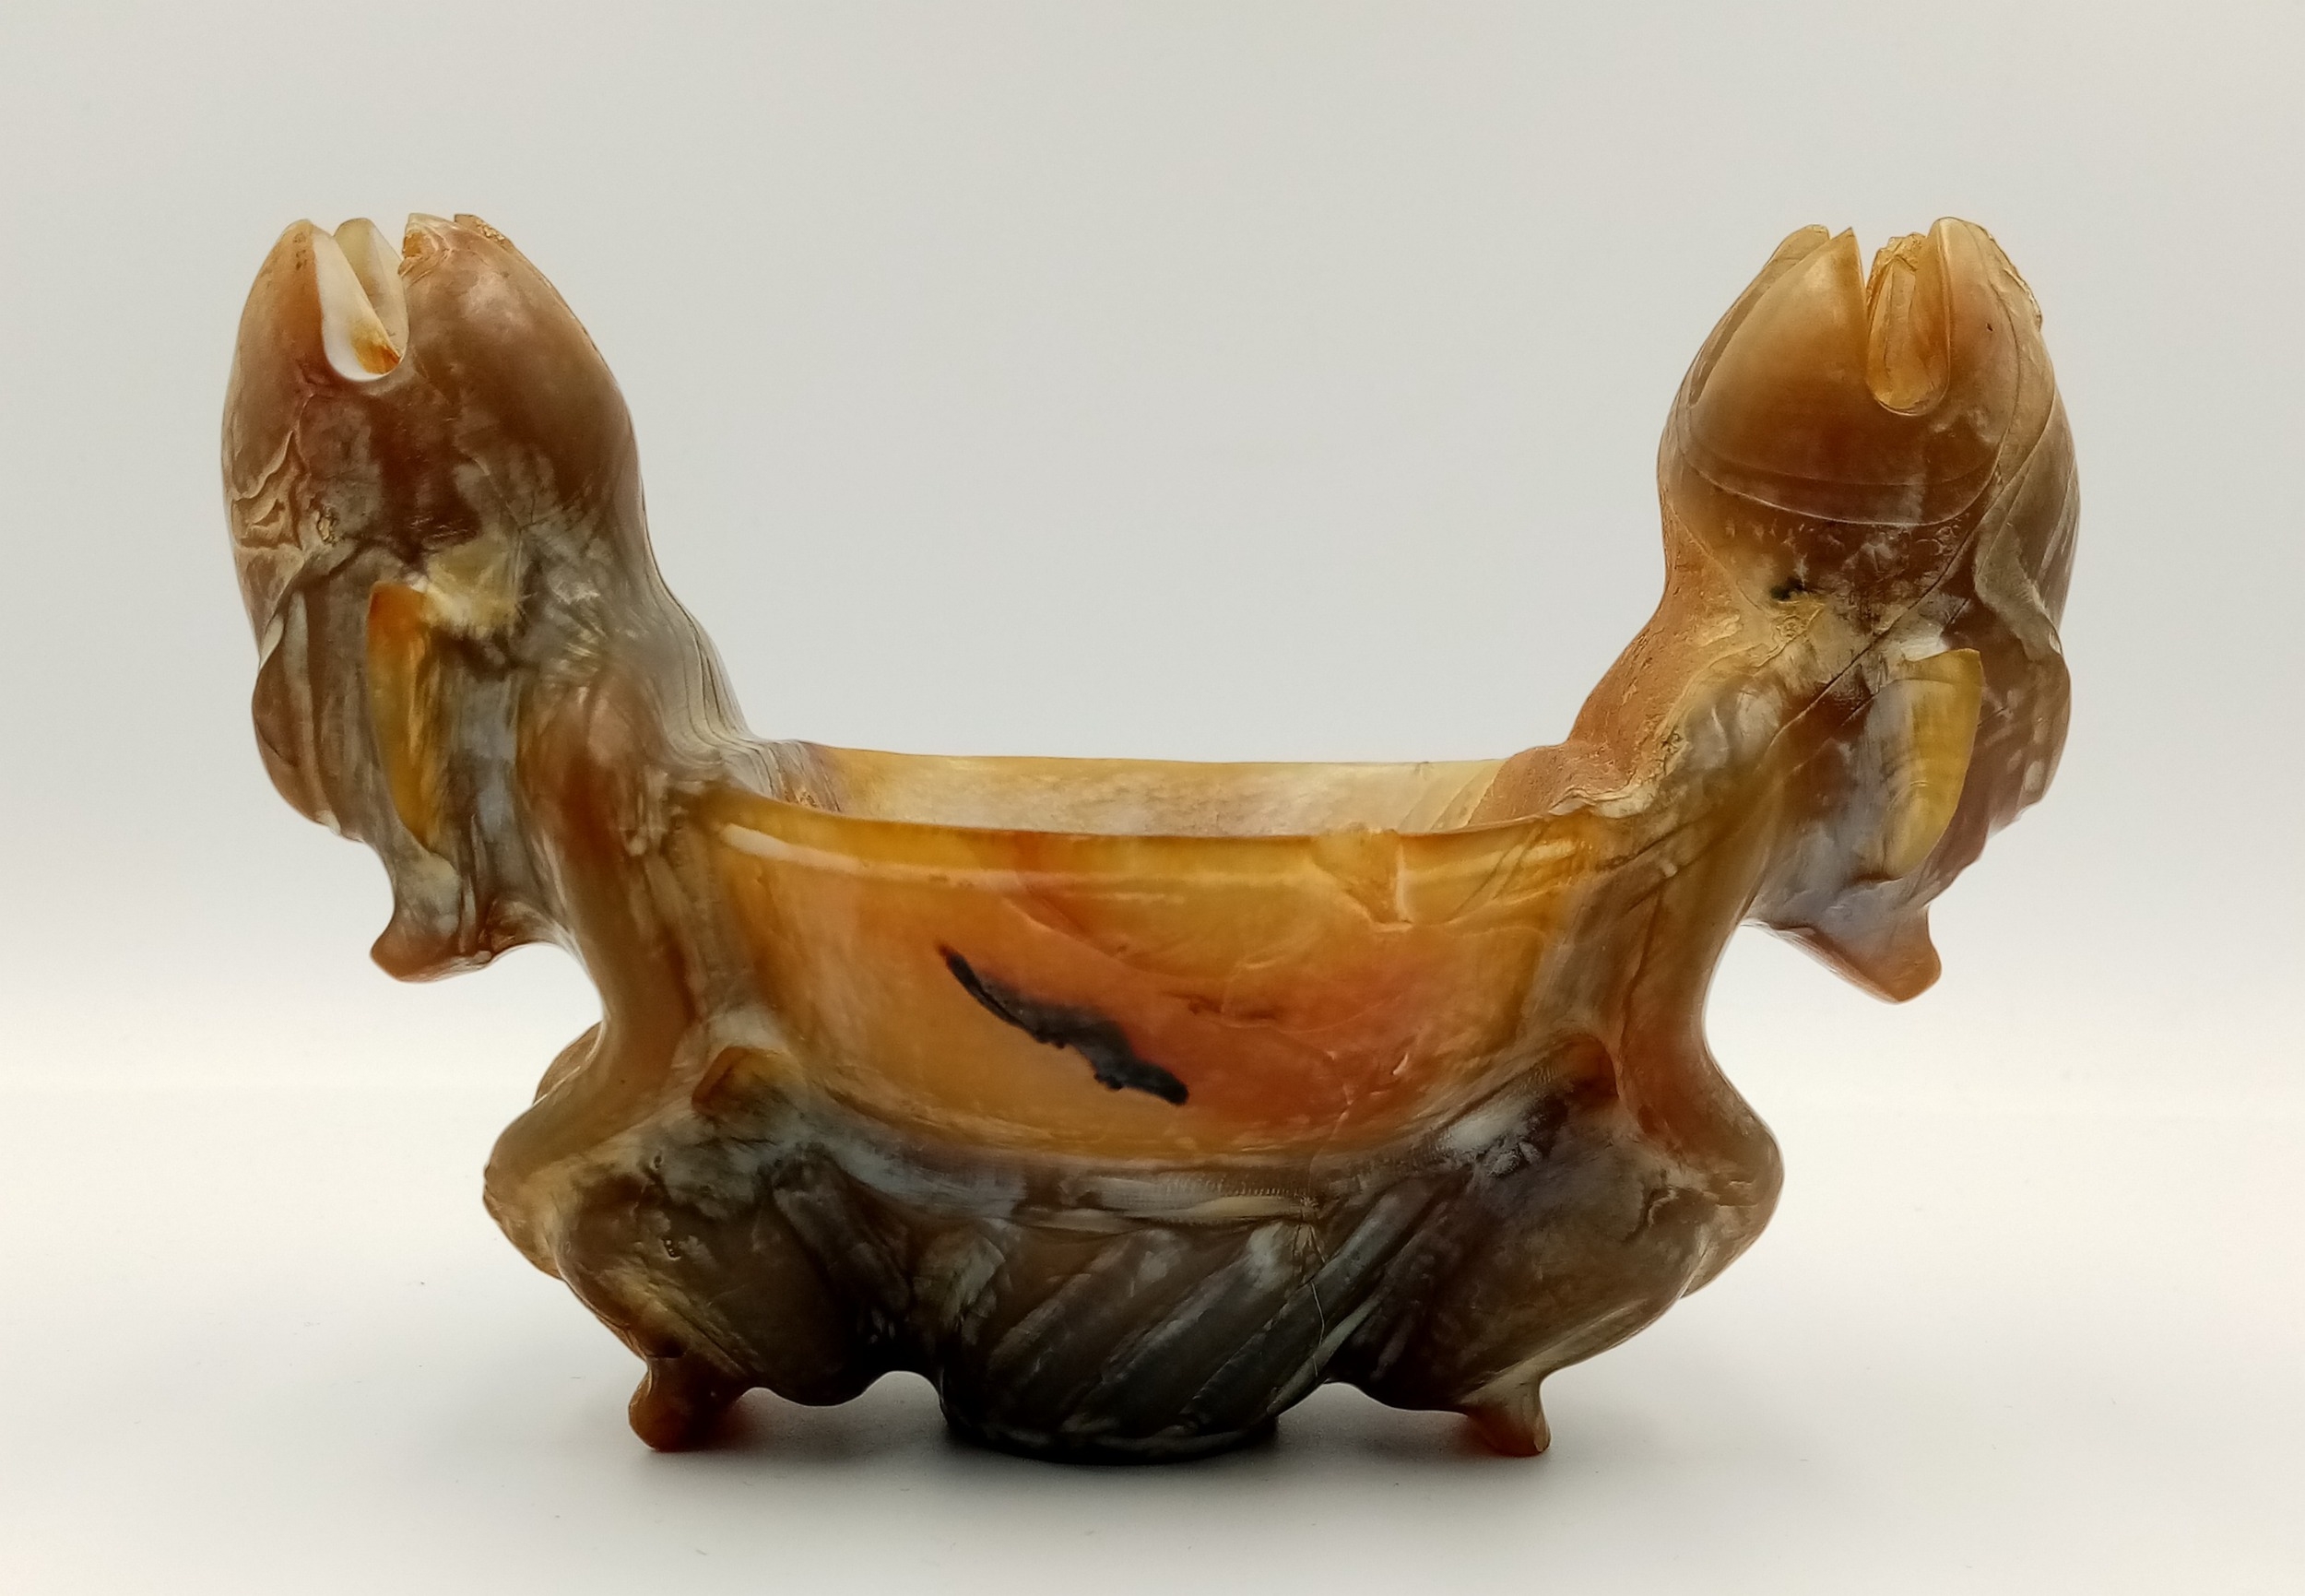 A Vintage Hand-Carved Chinese Agate Bowl with Two Ornate Men/Fish Decoration. 16 x 10cm.